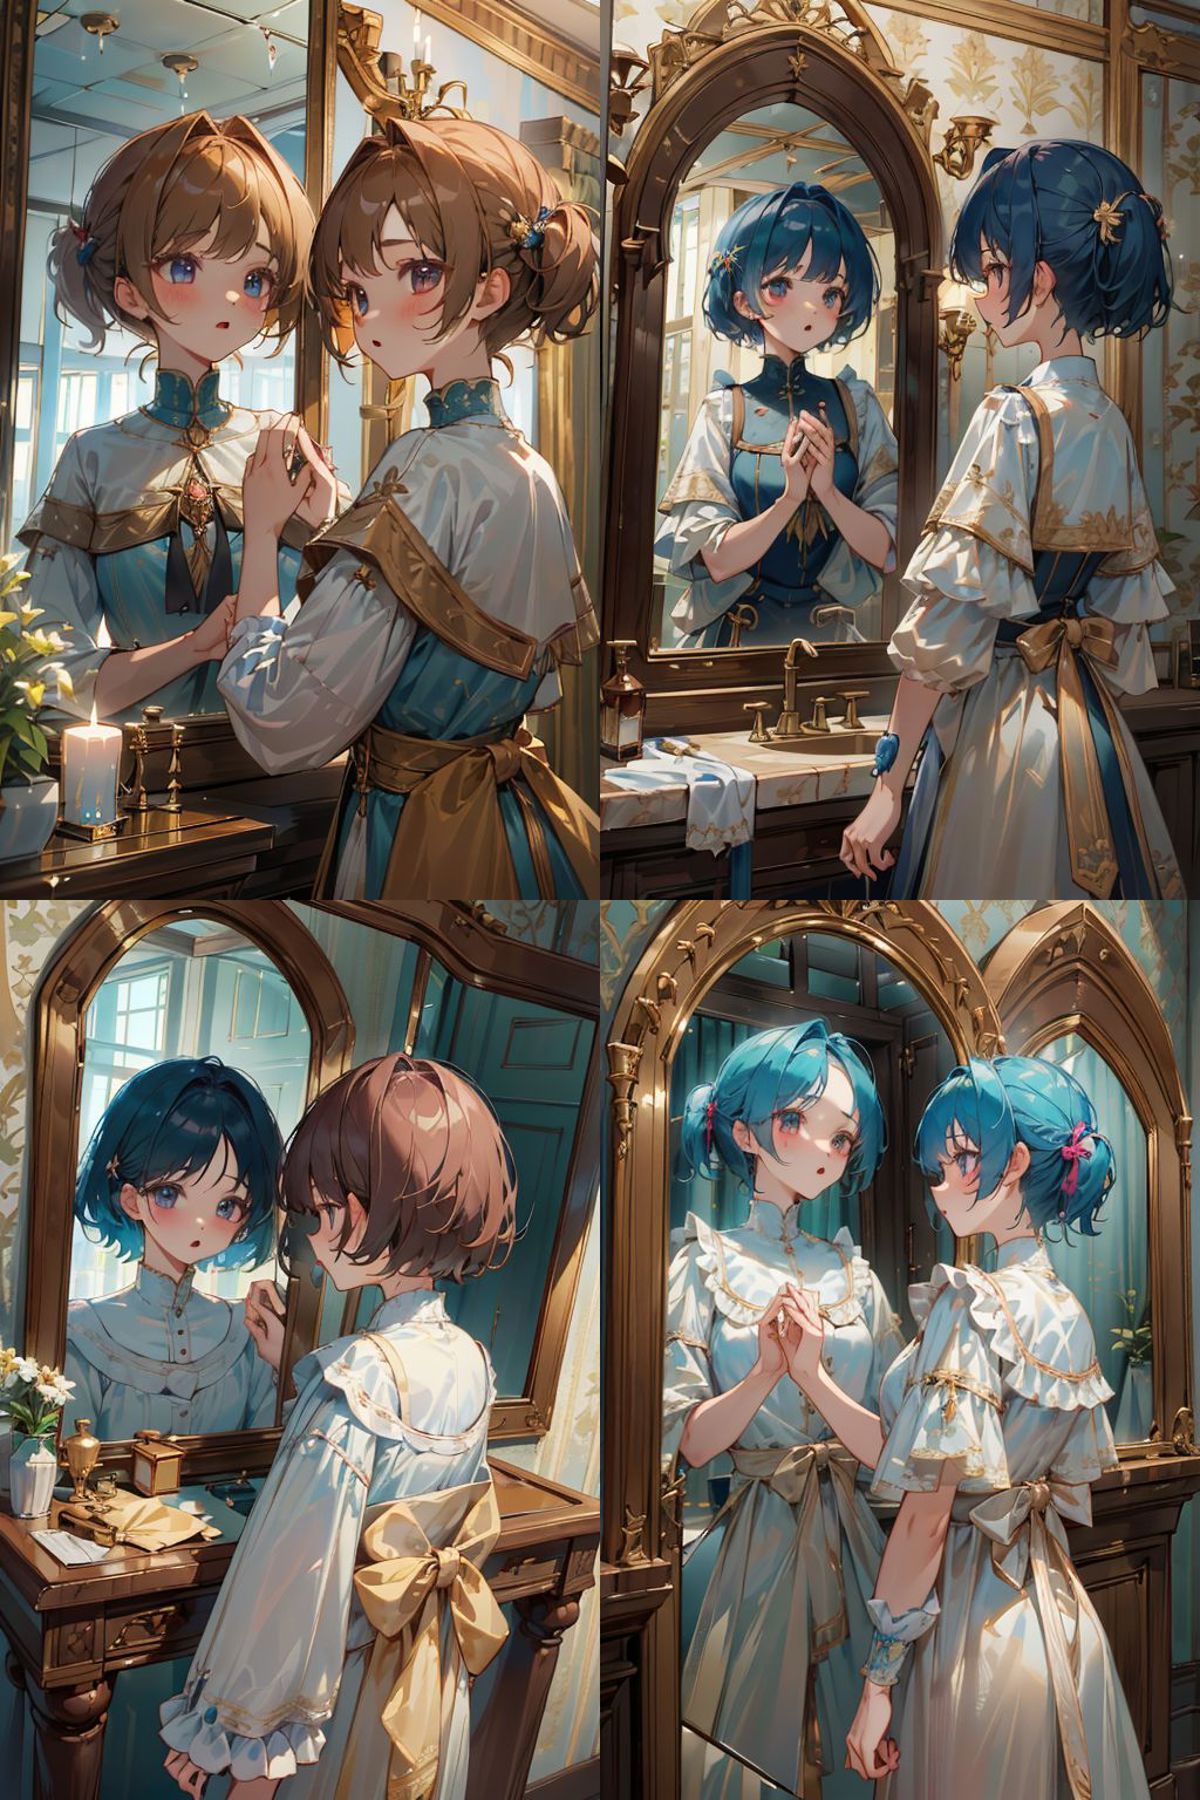 Better image in mirror | 更好照镜子 image by 7dragons